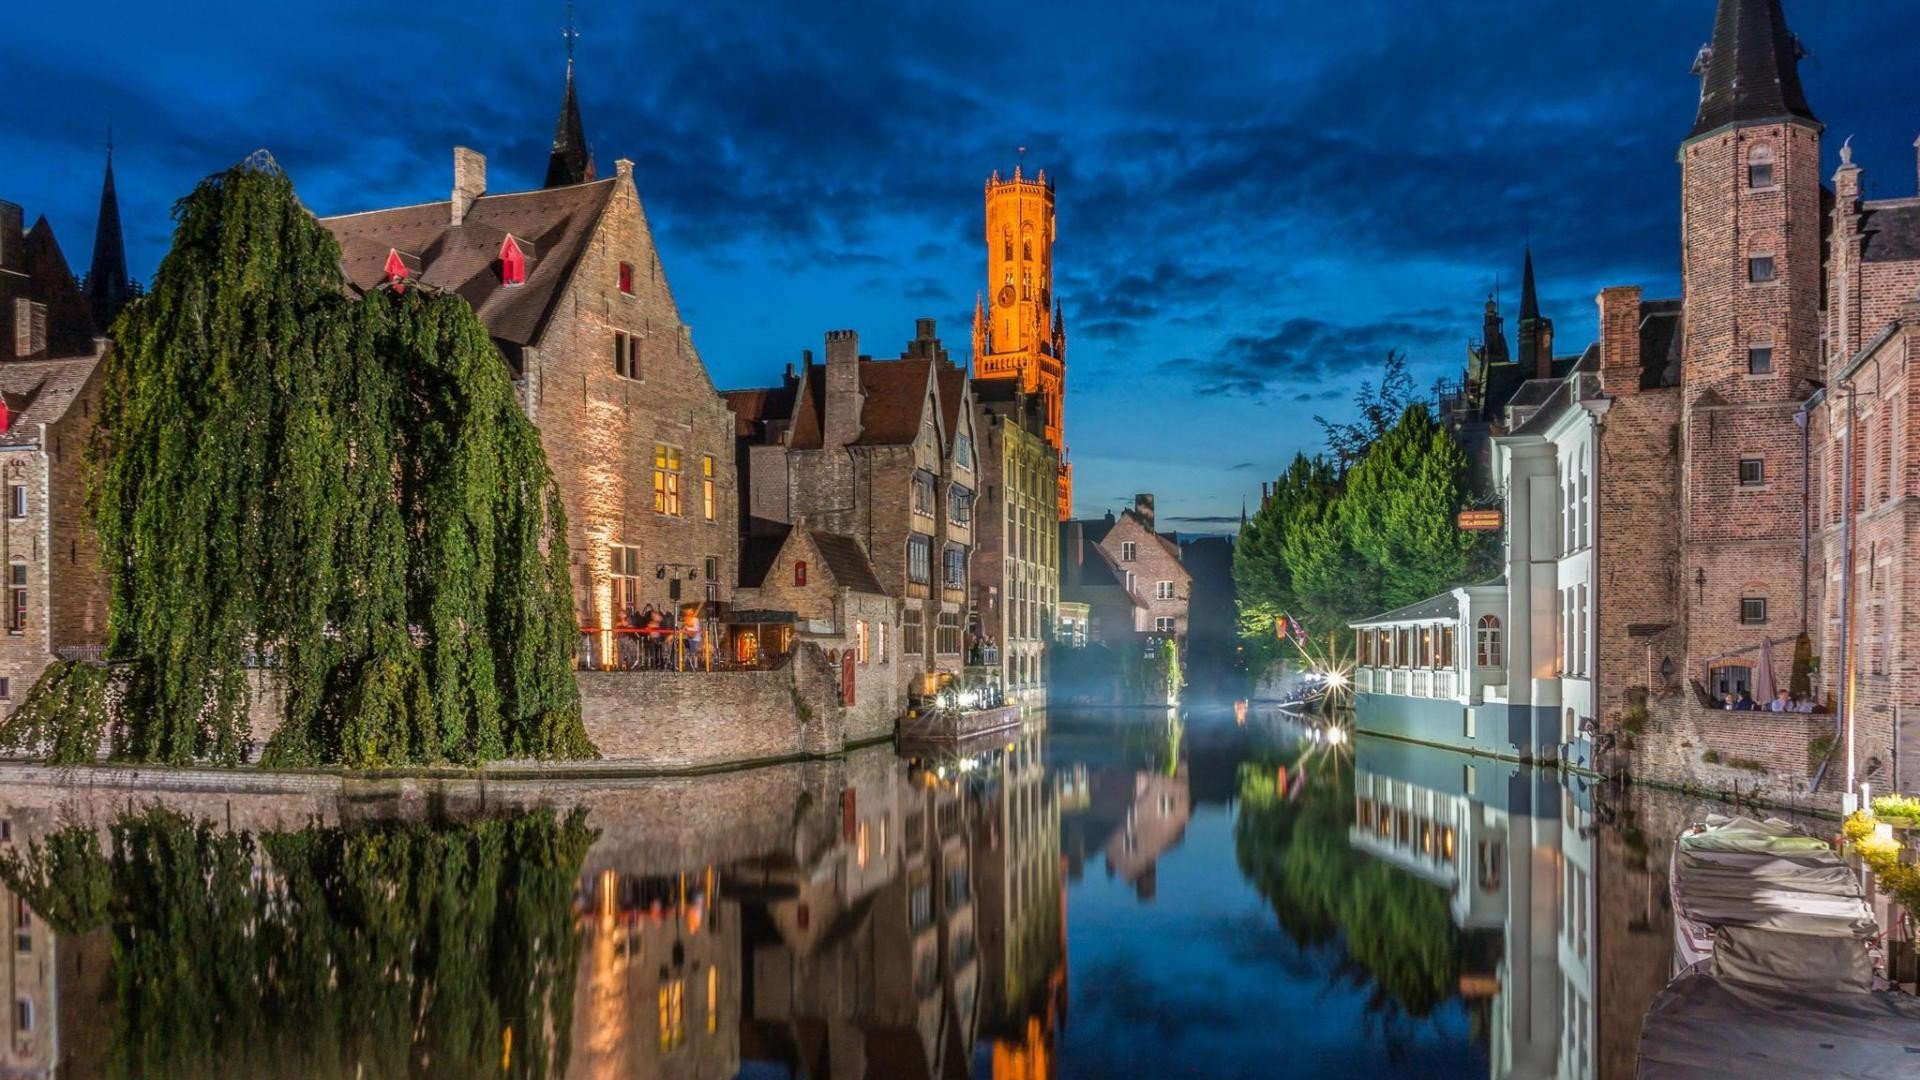 architecture, Building, Bruges, Belgium, Town, Old building, House, Tower, Ancient, Water, Trees, Night, Reflection, Clouds, Boat Wallpaper